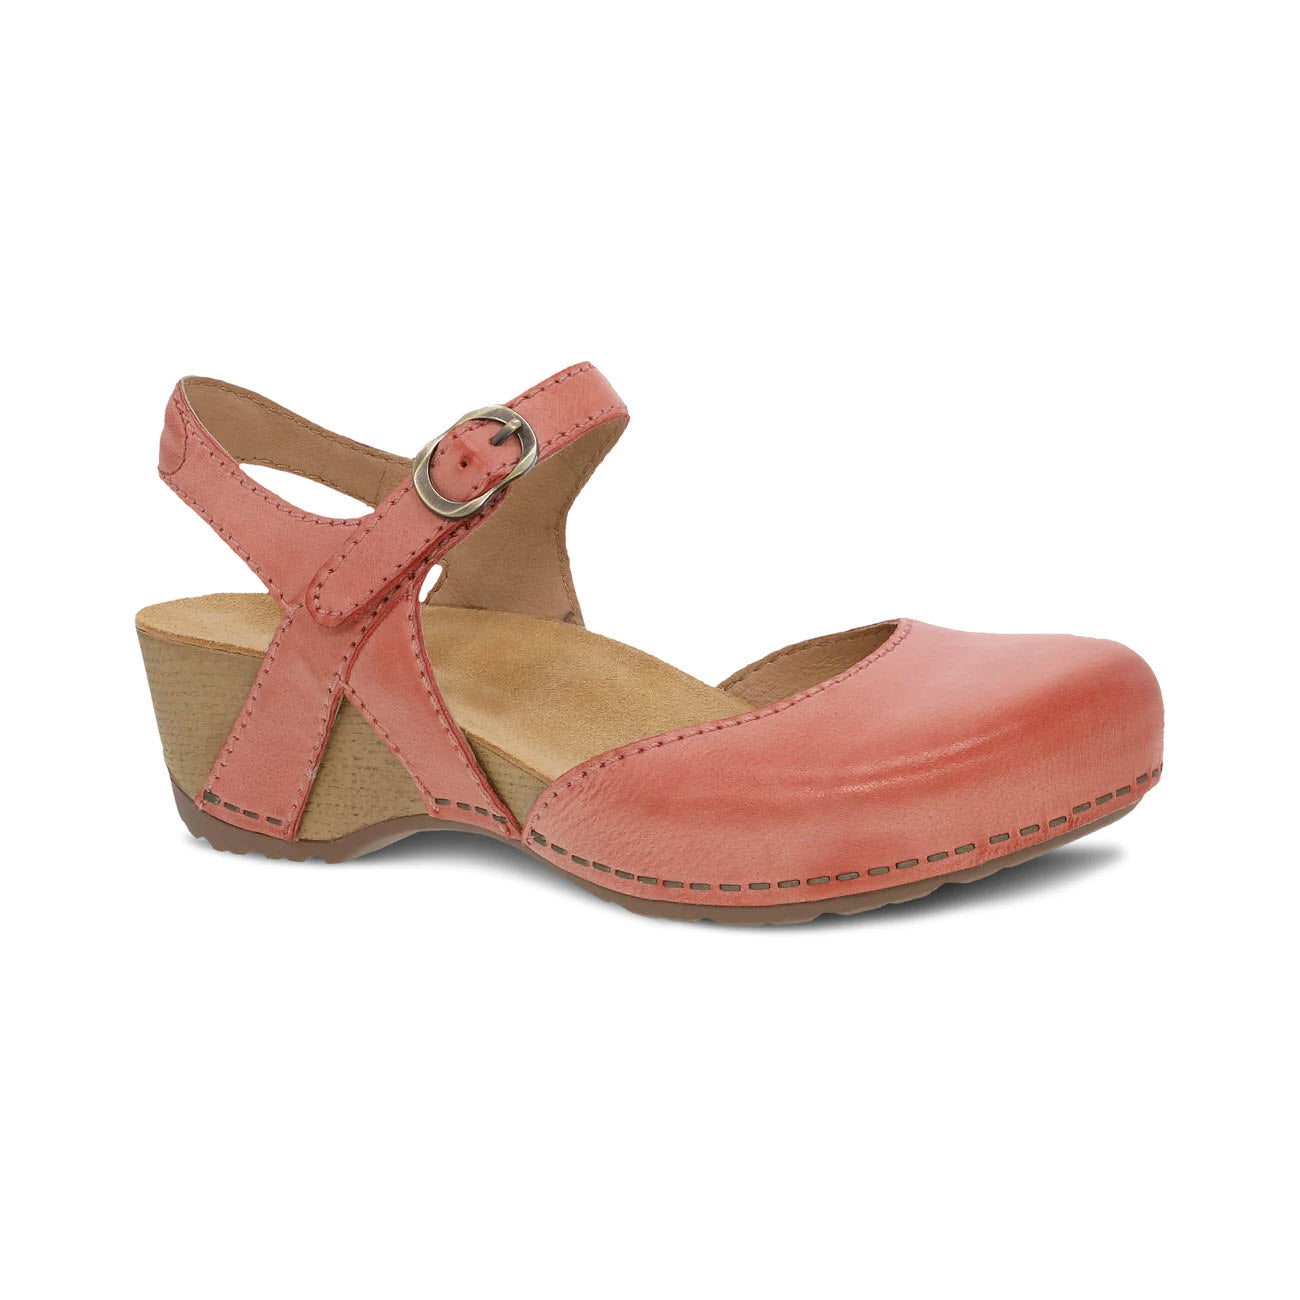 A Dansko coral pink leather sandal with a closed toe, an ankle strap, buckle closure, and a medium wood block heel.